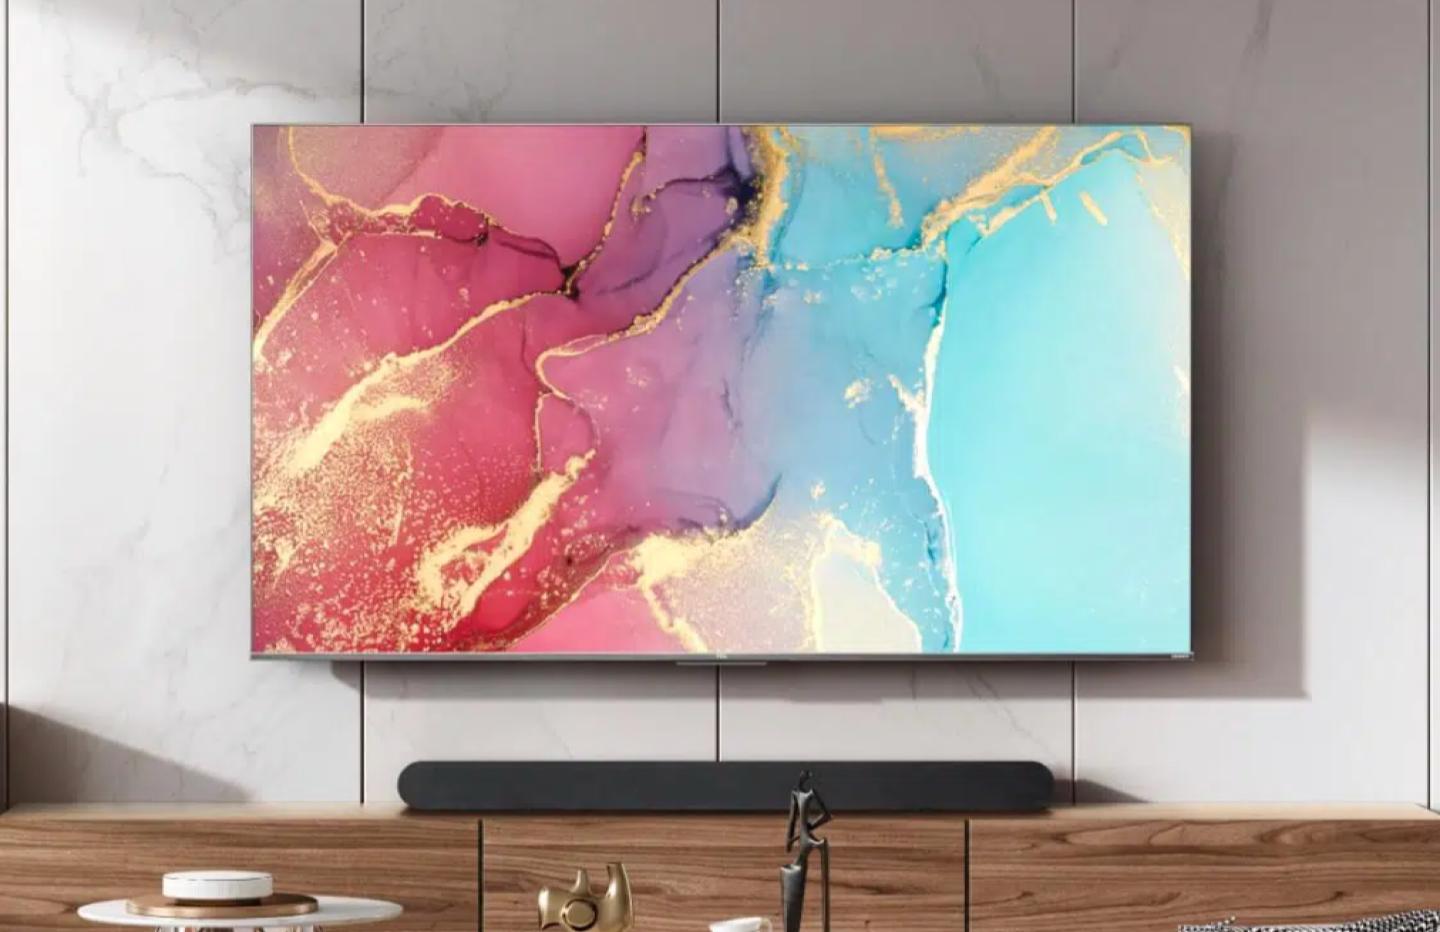 This 55-inch 4K QLED TV (HDMI 2.1) is on sale for just €499 - GEARRICE